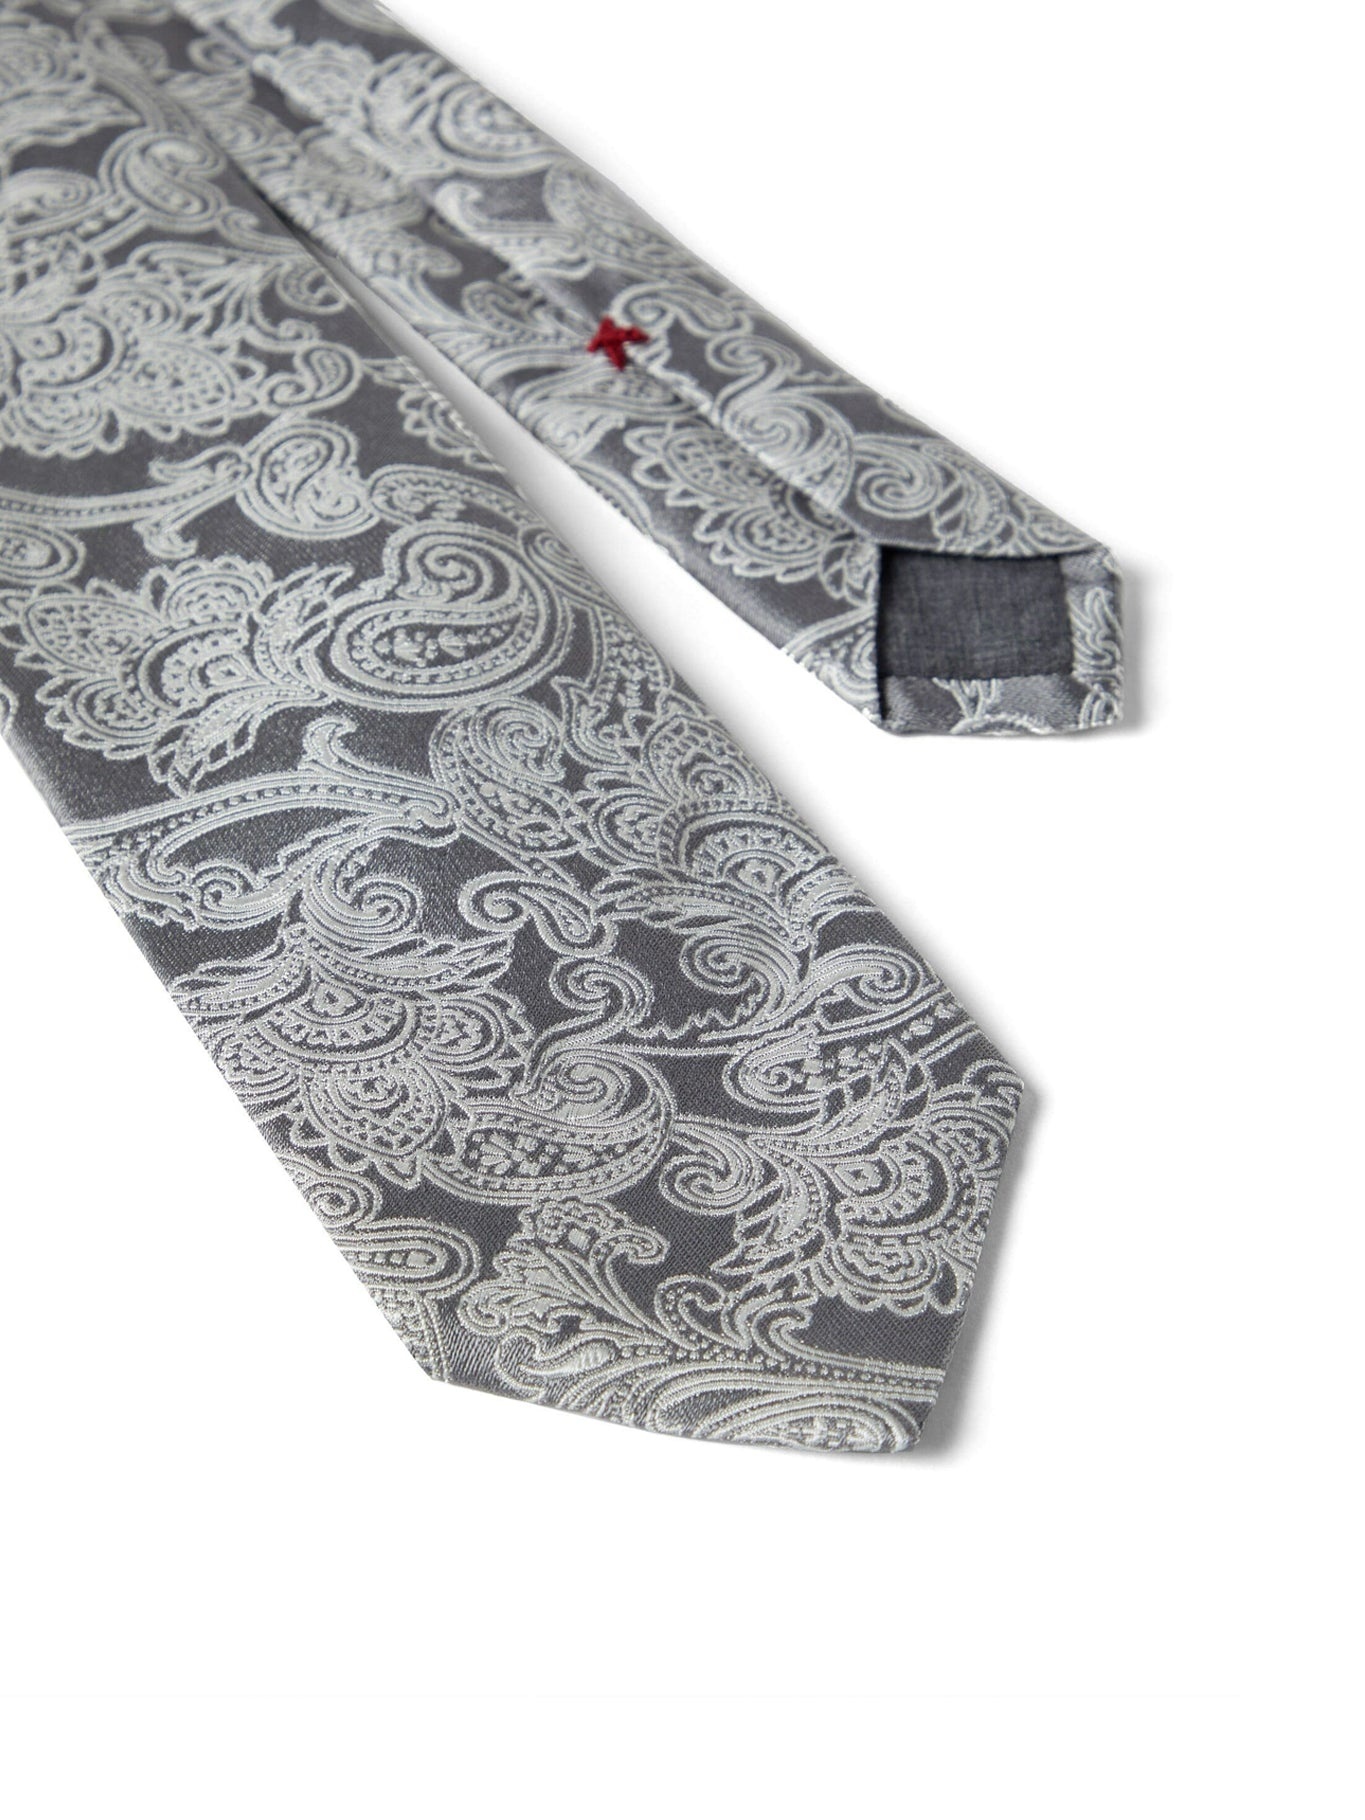 TIE WITH JACQUARD EFFECT - 2